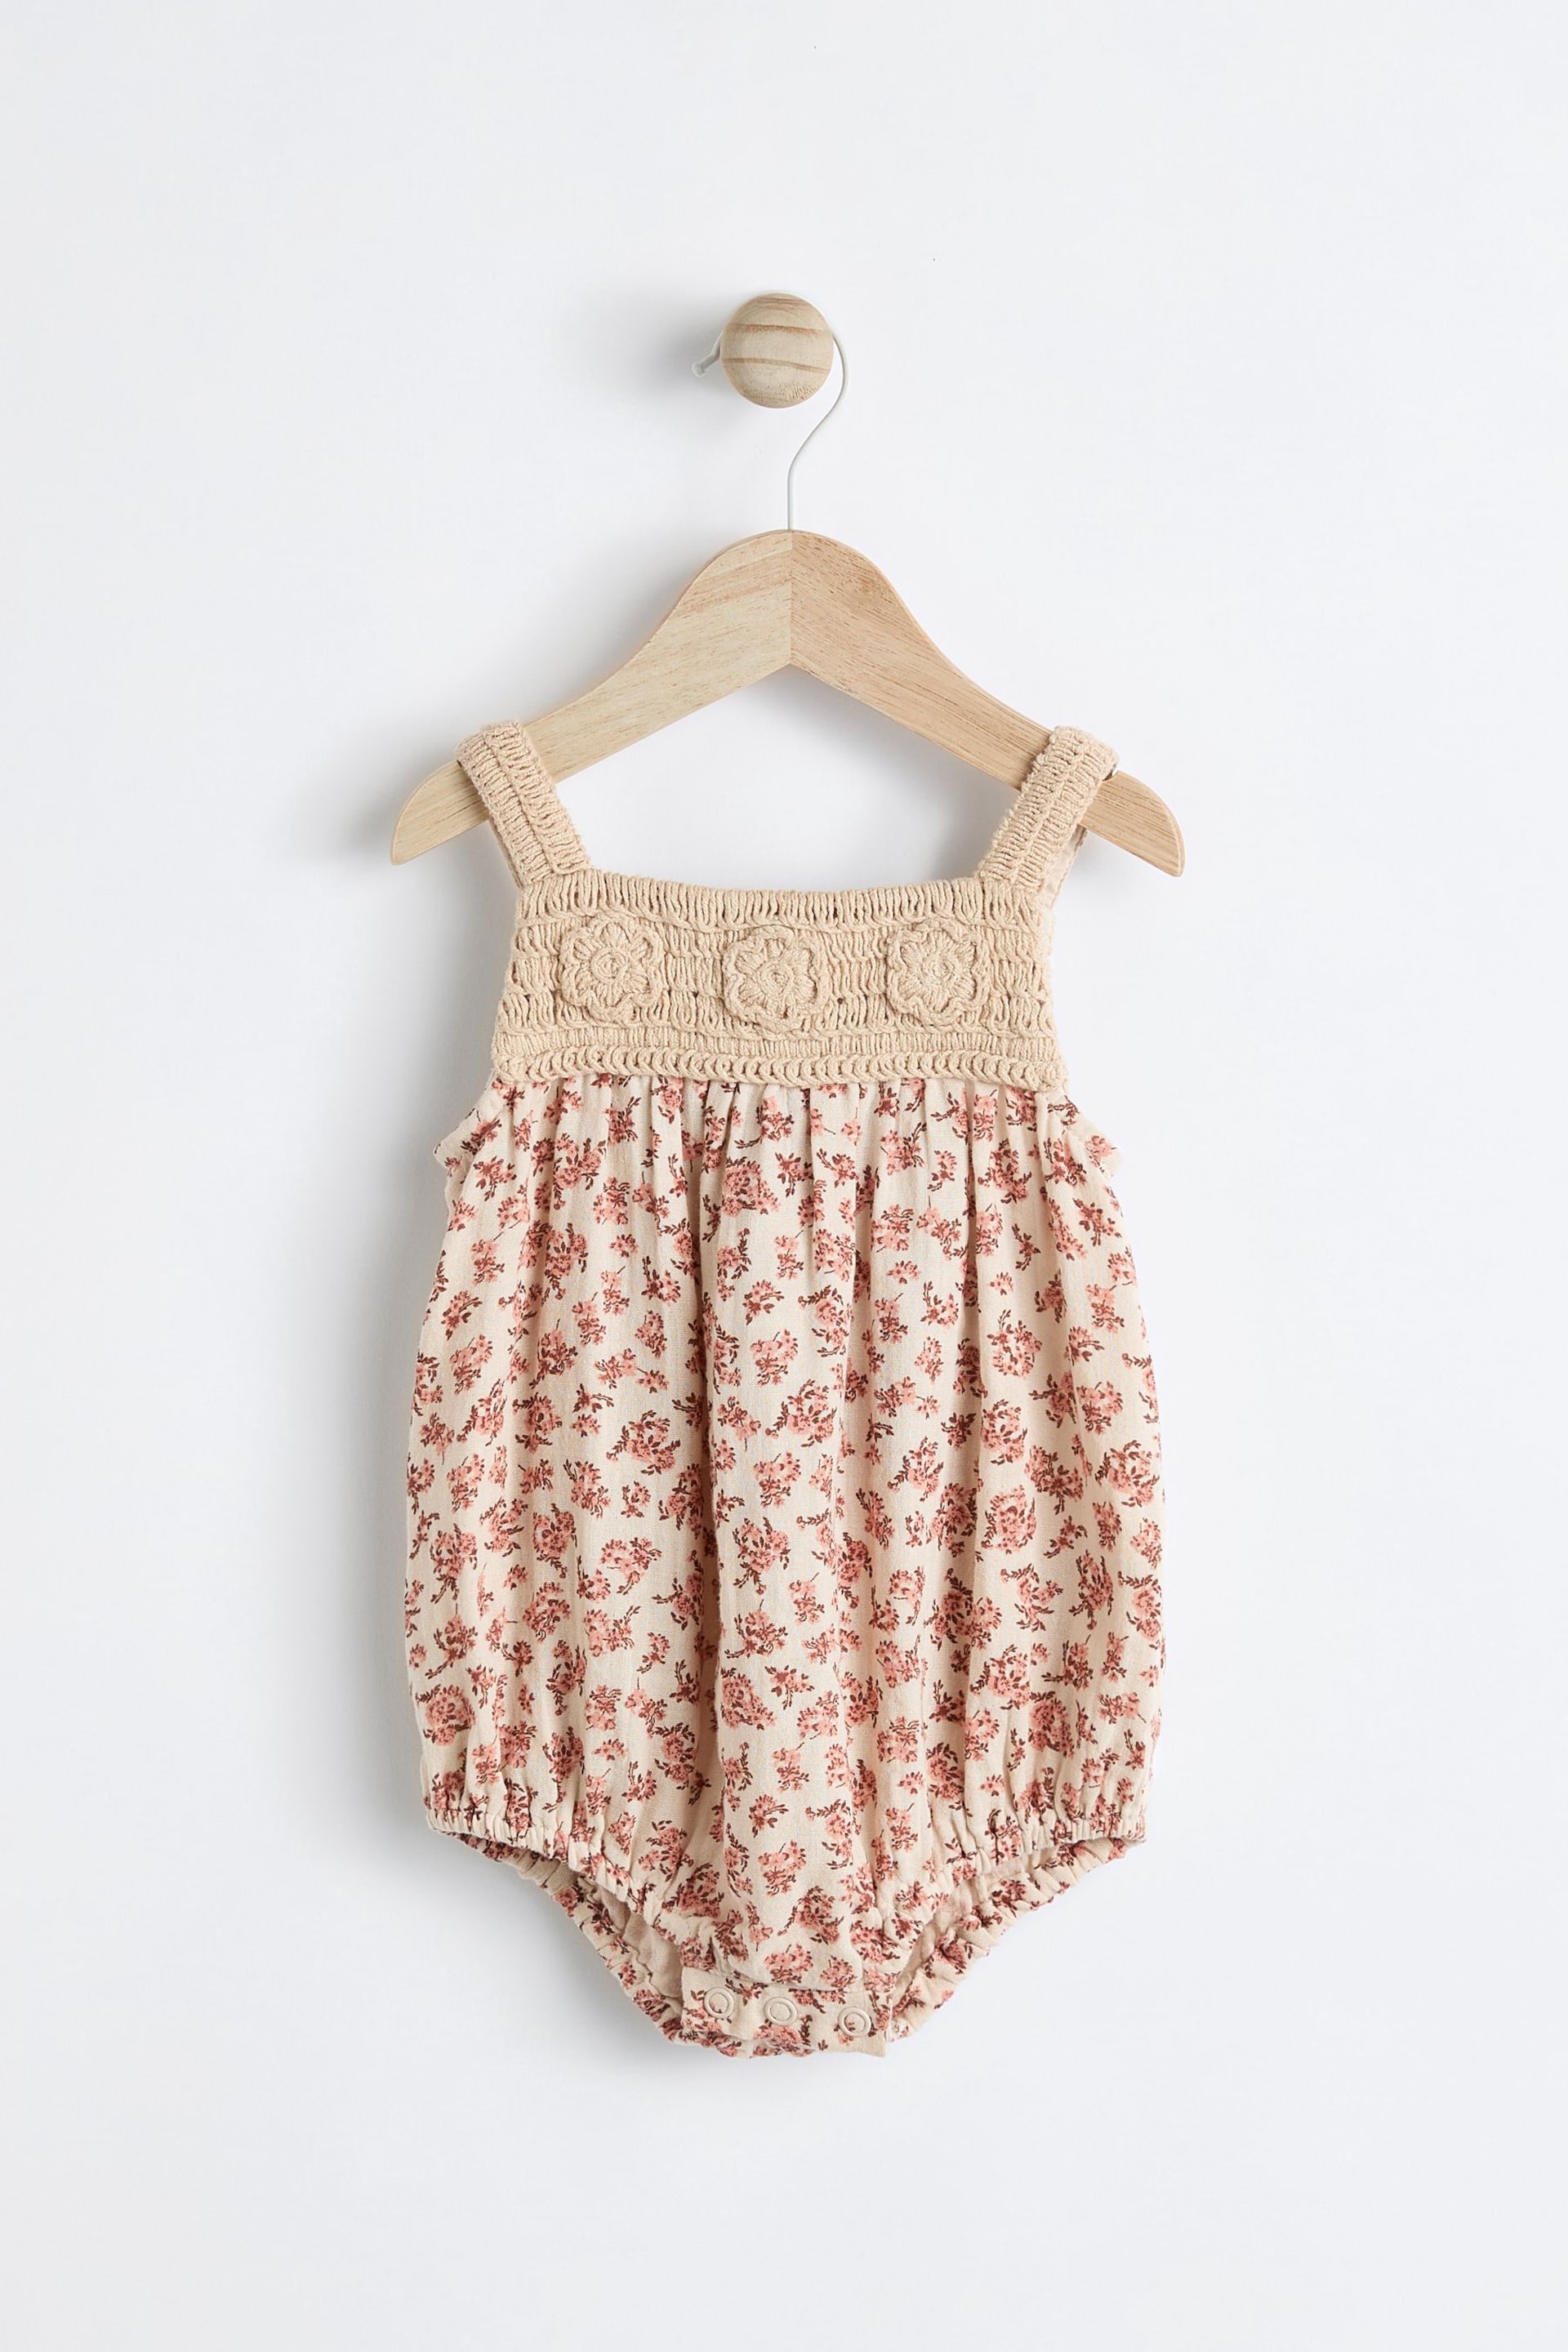 Rust Brown/ Cream Floral Baby Crochet Bloomer Romper (0mths-2yrs) - Image 3 of 8